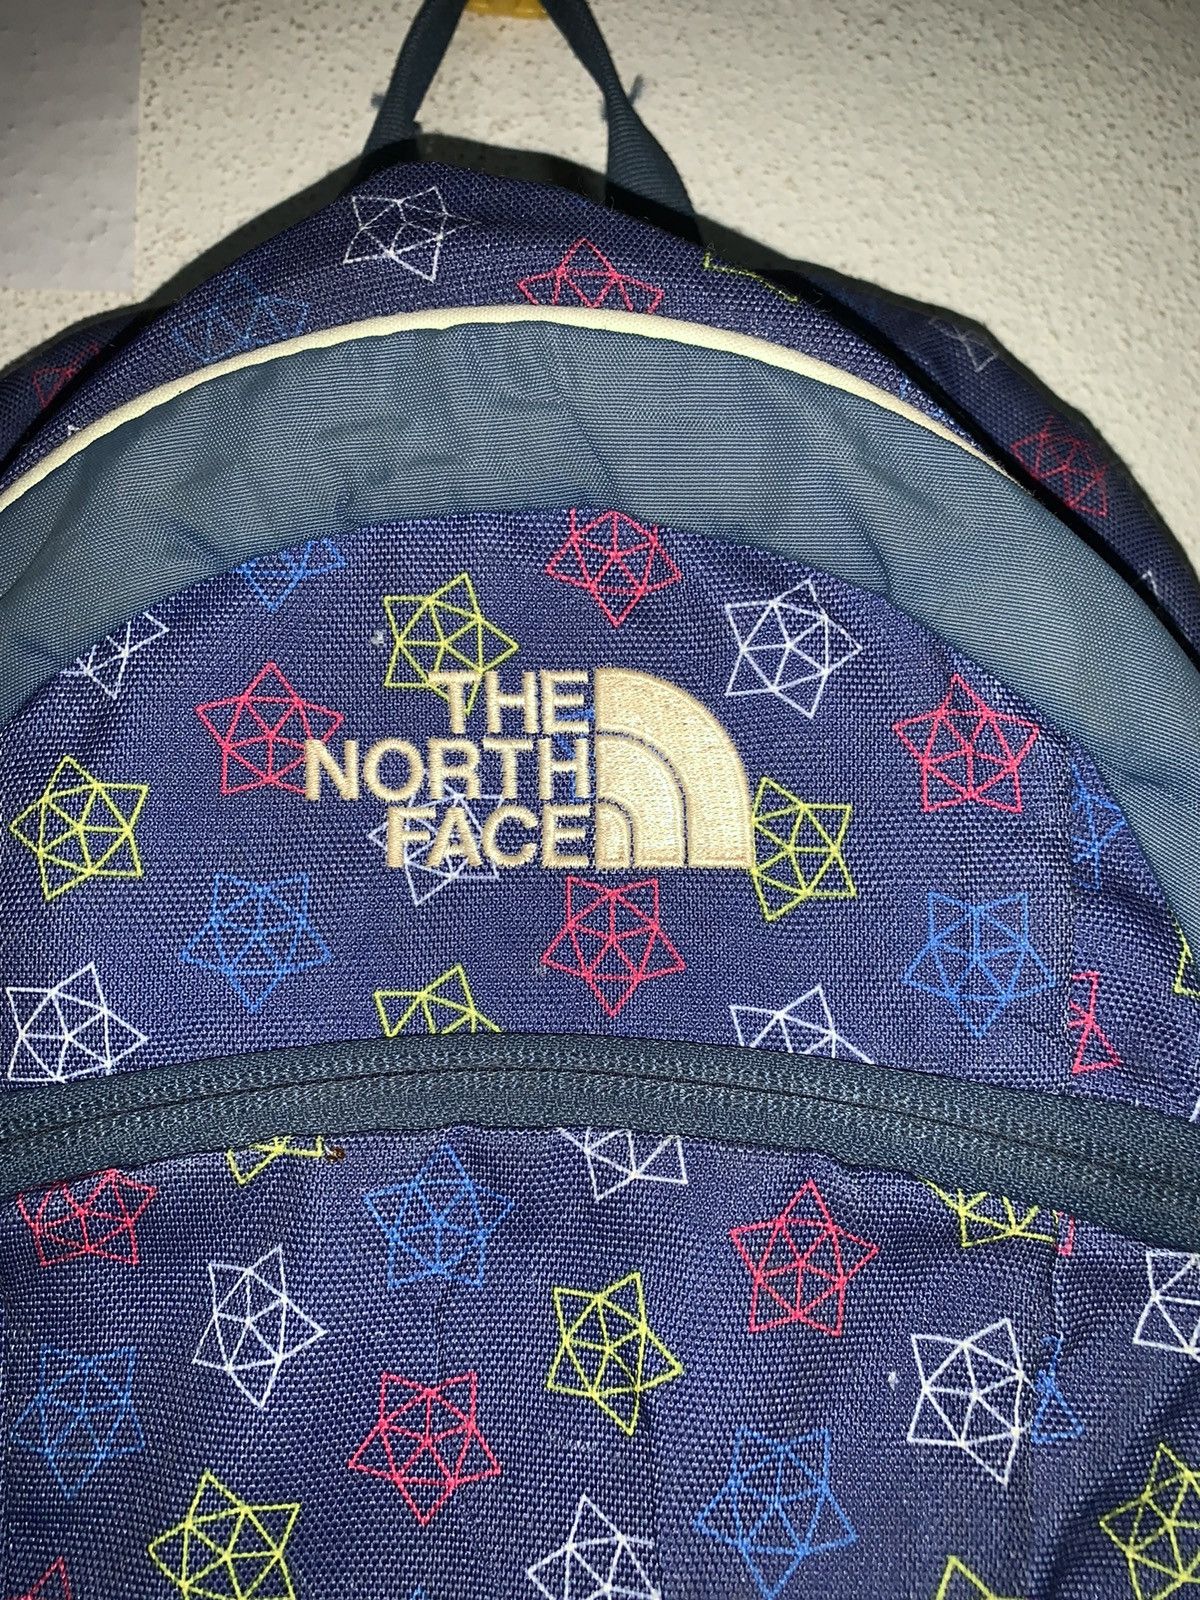 Bacpack Bag The North Face Small Day - 12